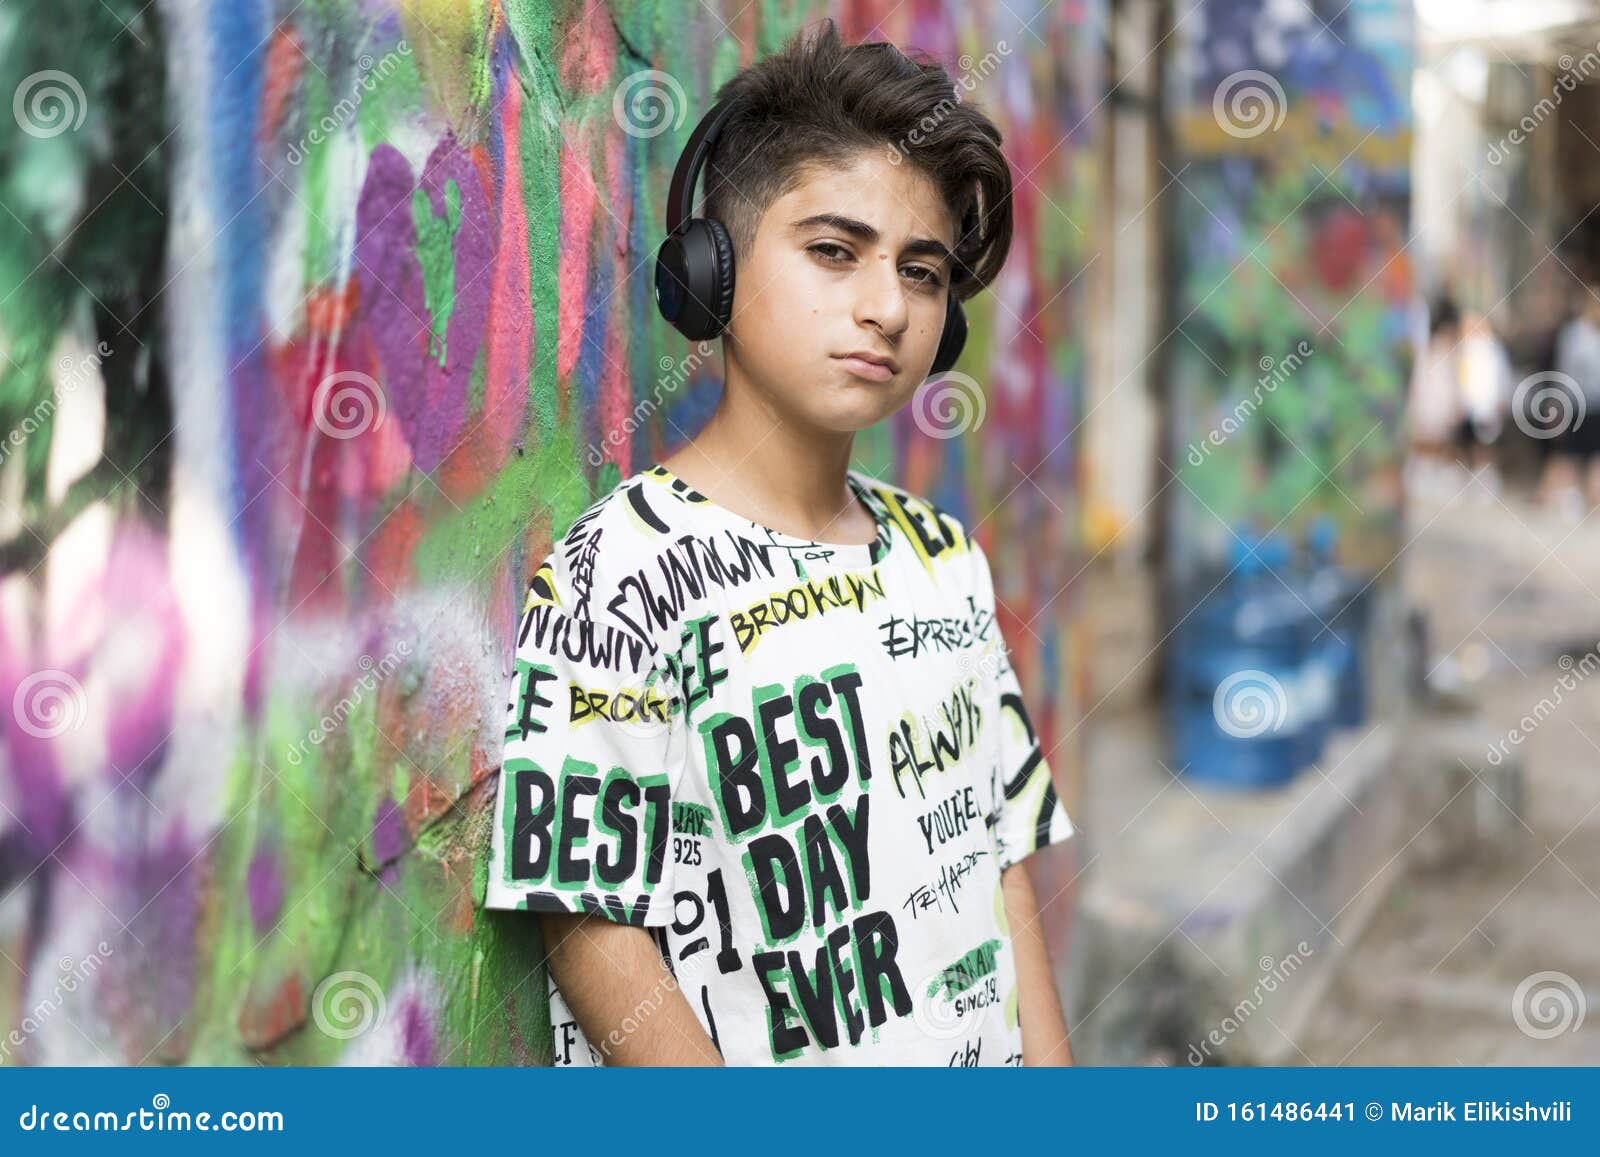 boy portrait with earphones and grafiti behind